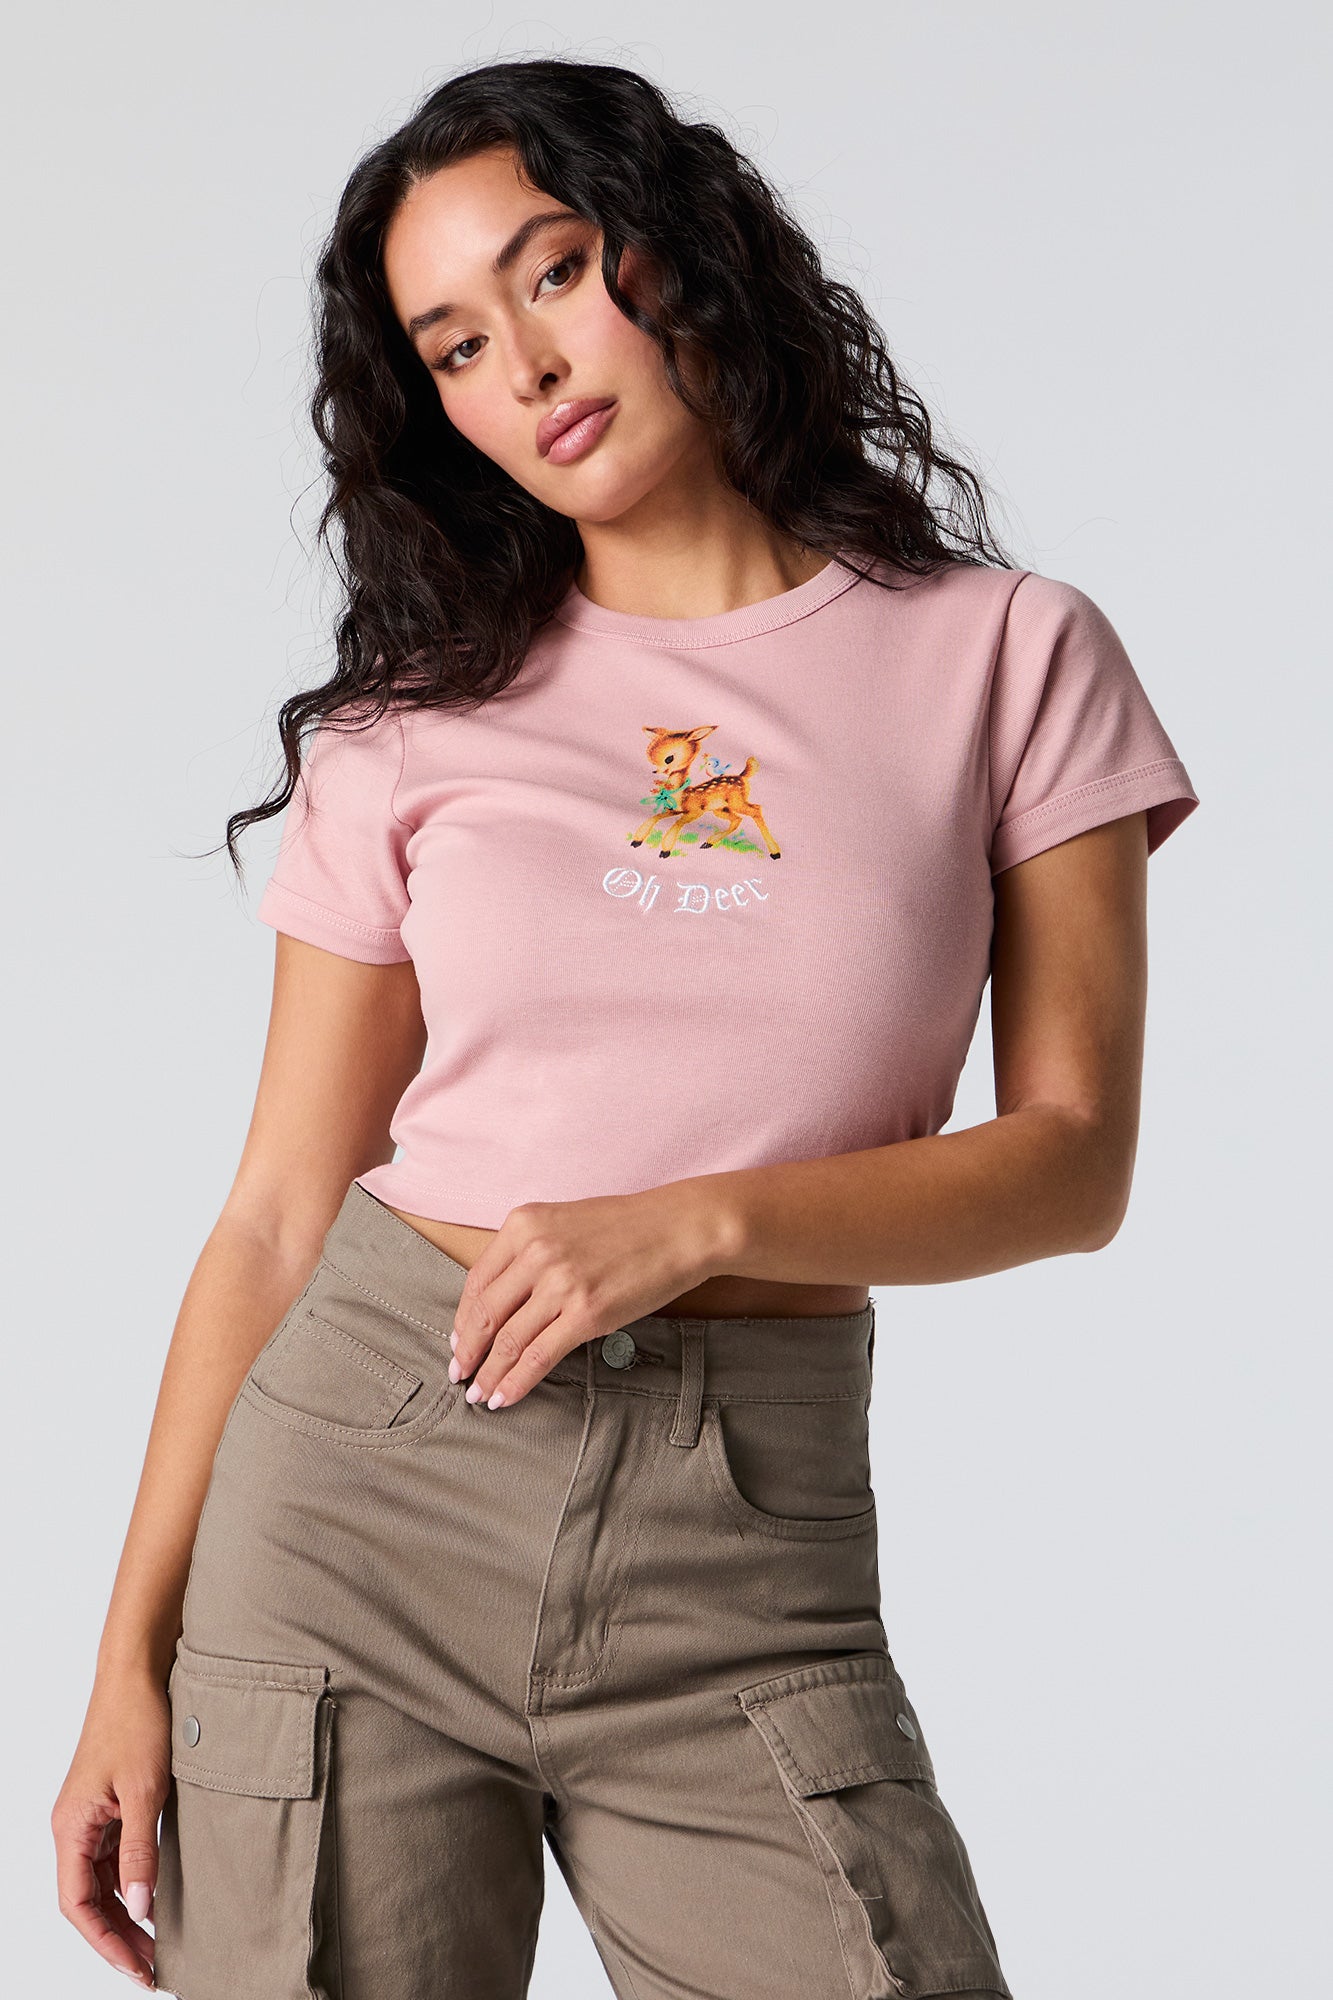 Oh Deer Embroidered Baby T-Shirt